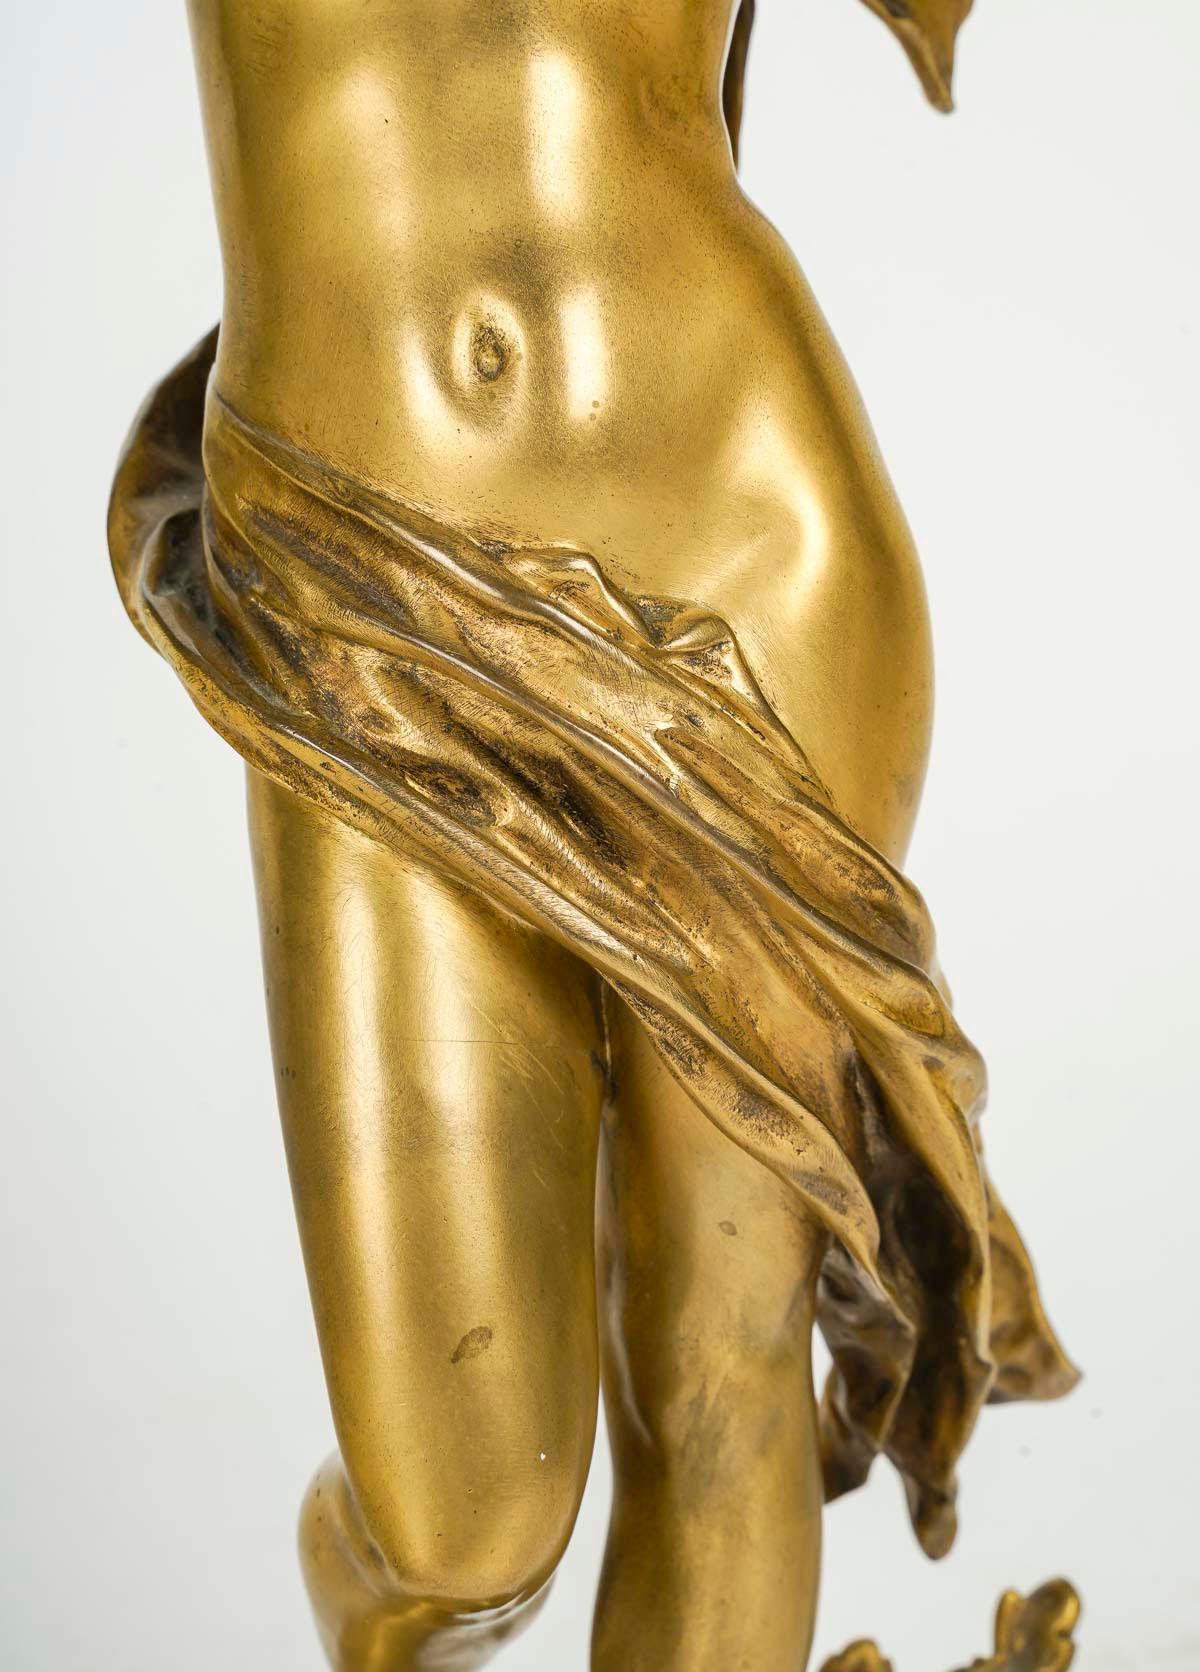 French Gilded Bronze Sculpture by Felix Charpentier, 19th Century, Napoleon III Period. For Sale